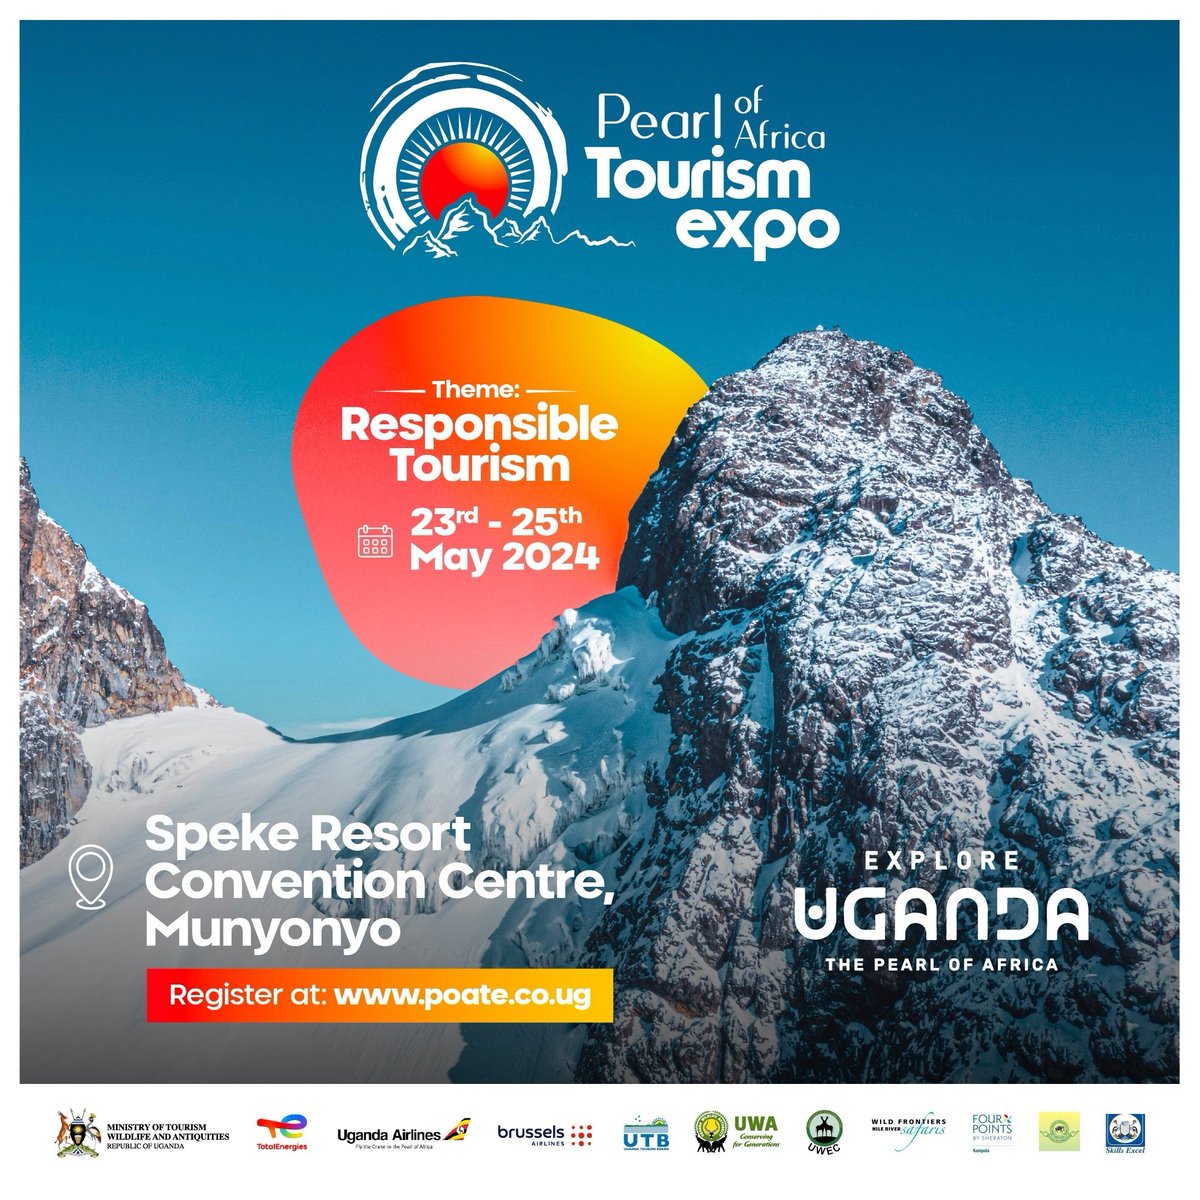 Only 16 days to the biggest Tourism Expo @POATE_UG at @spekeresort, Munyonyo! Hopefully you've registered to partake in the opportunities,linkages & connections that come with the best Tourism Expo in #EastAfrica hinged on the theme,'Responsible Tourism'. @ExploreUganda @mugarra